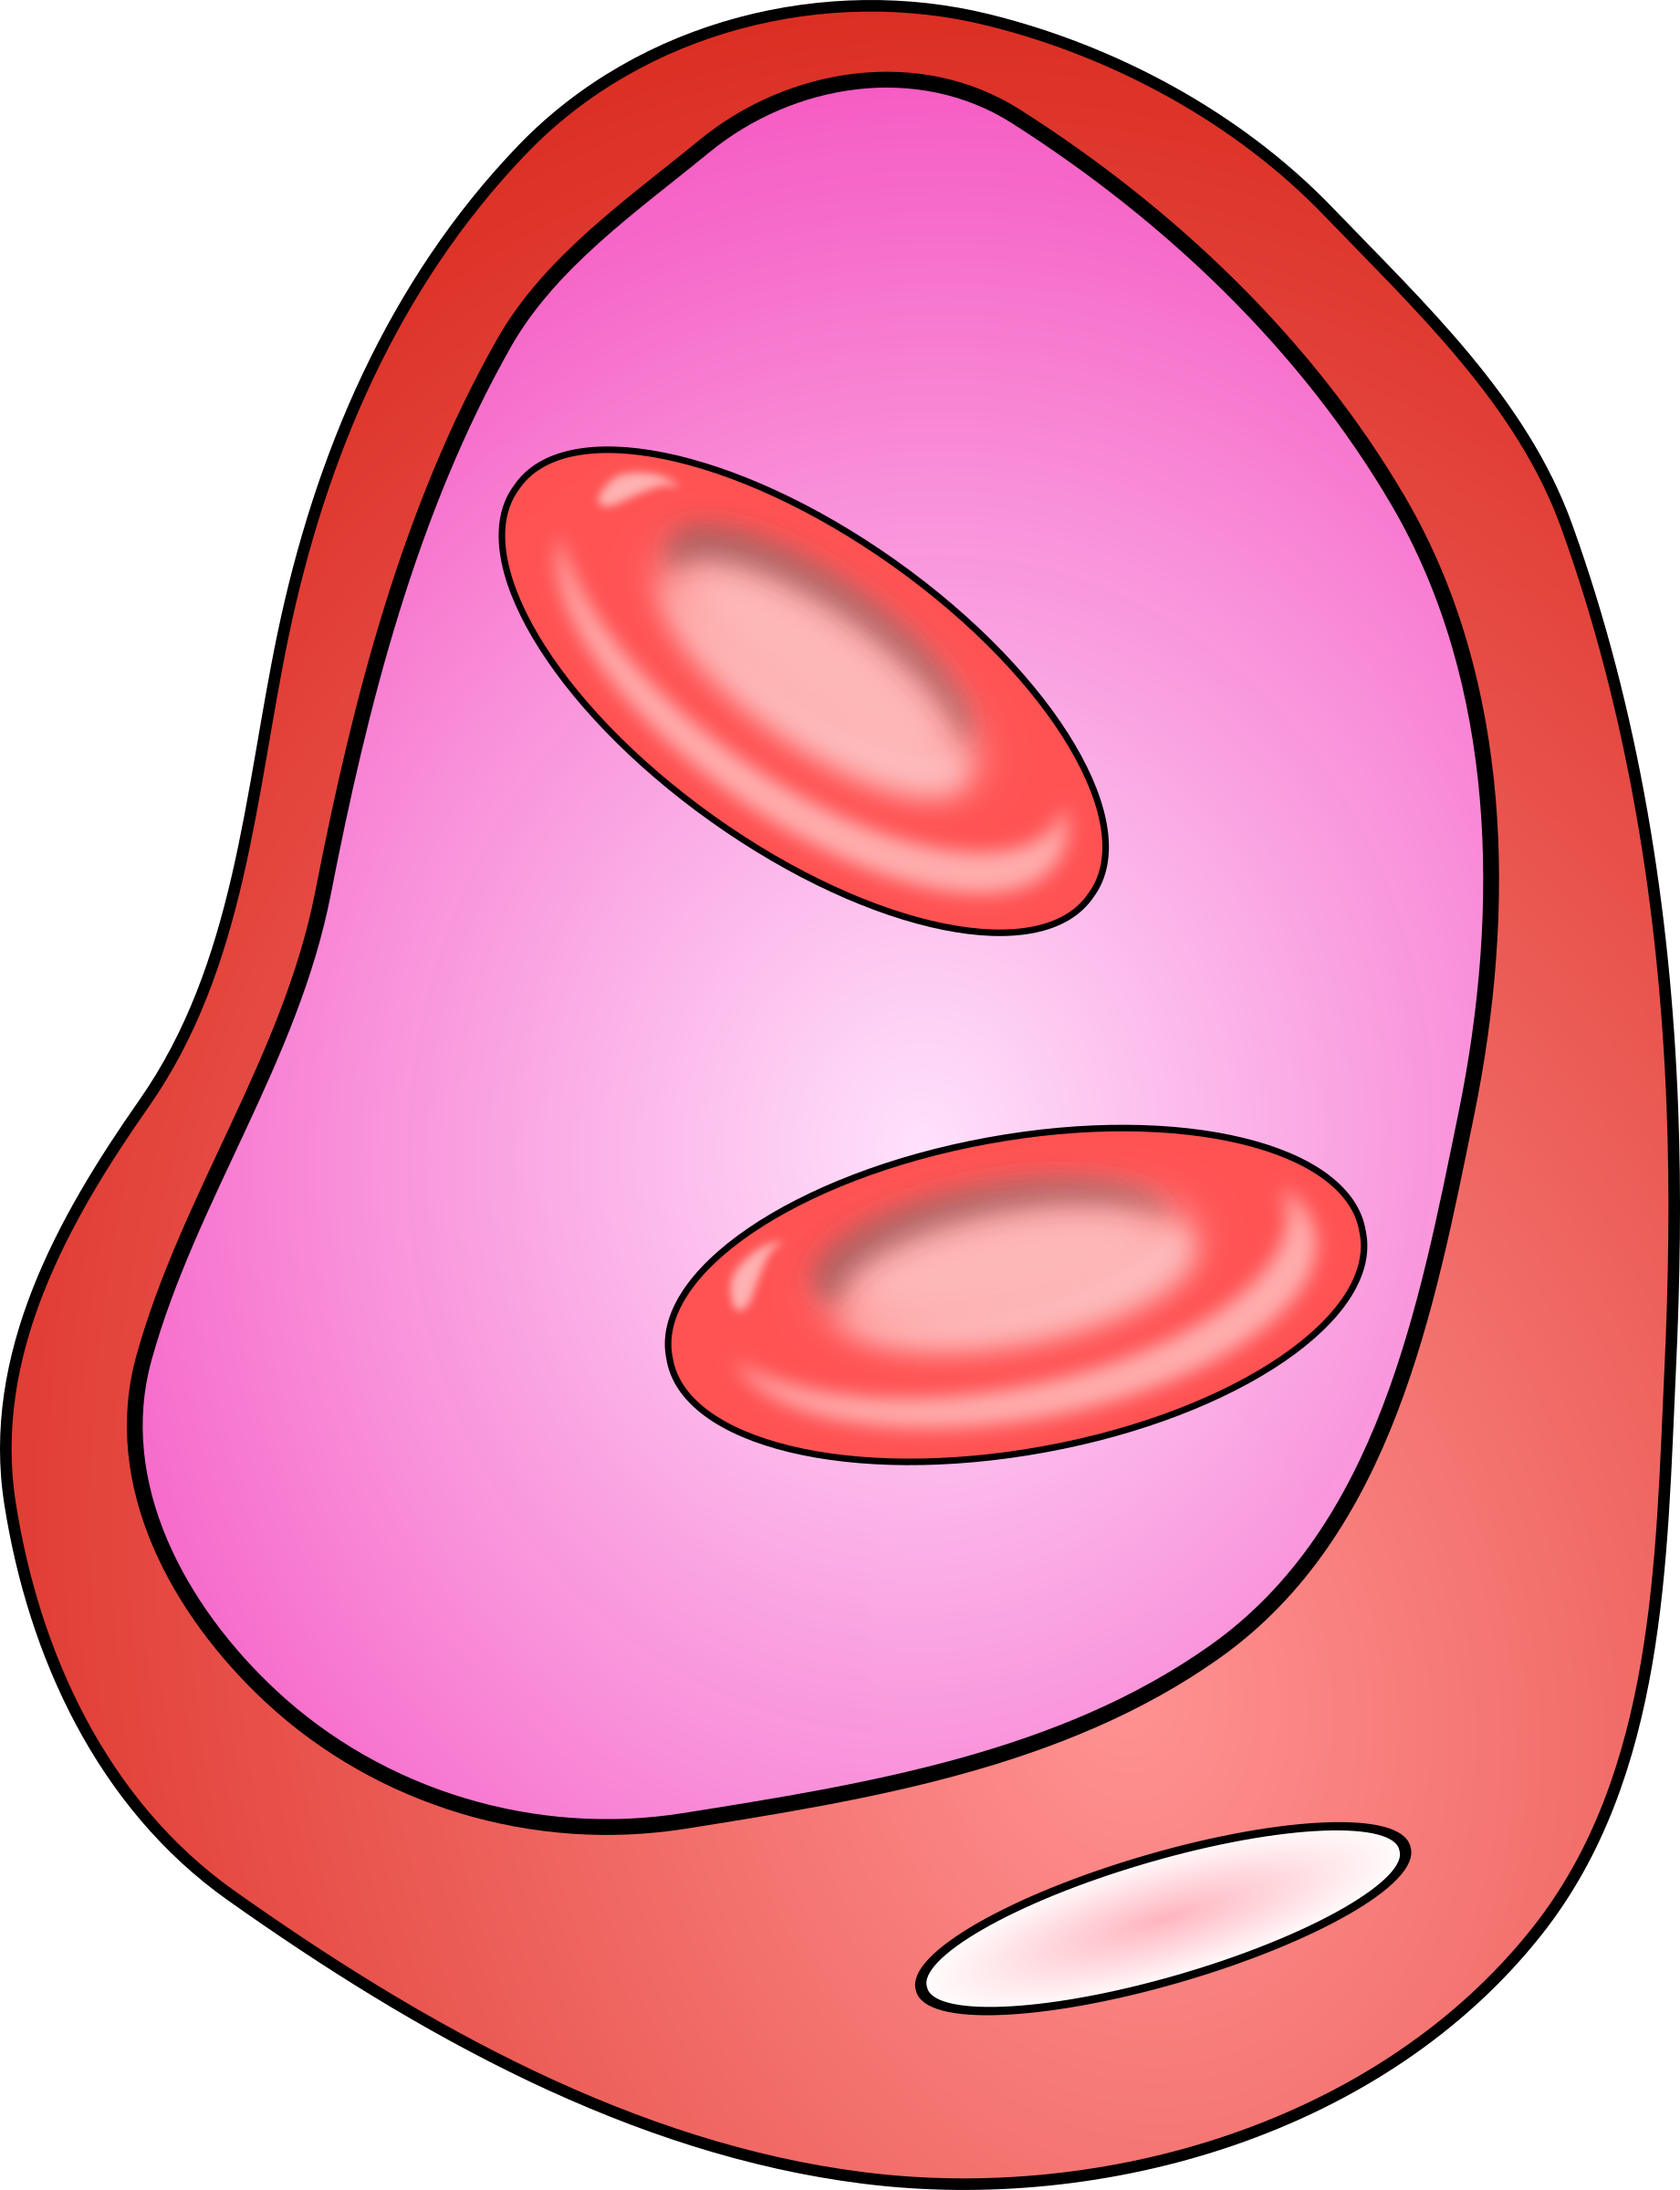 Free Blood Vessel With Erythrocites - Clipart Of A Cell (1841x2400)